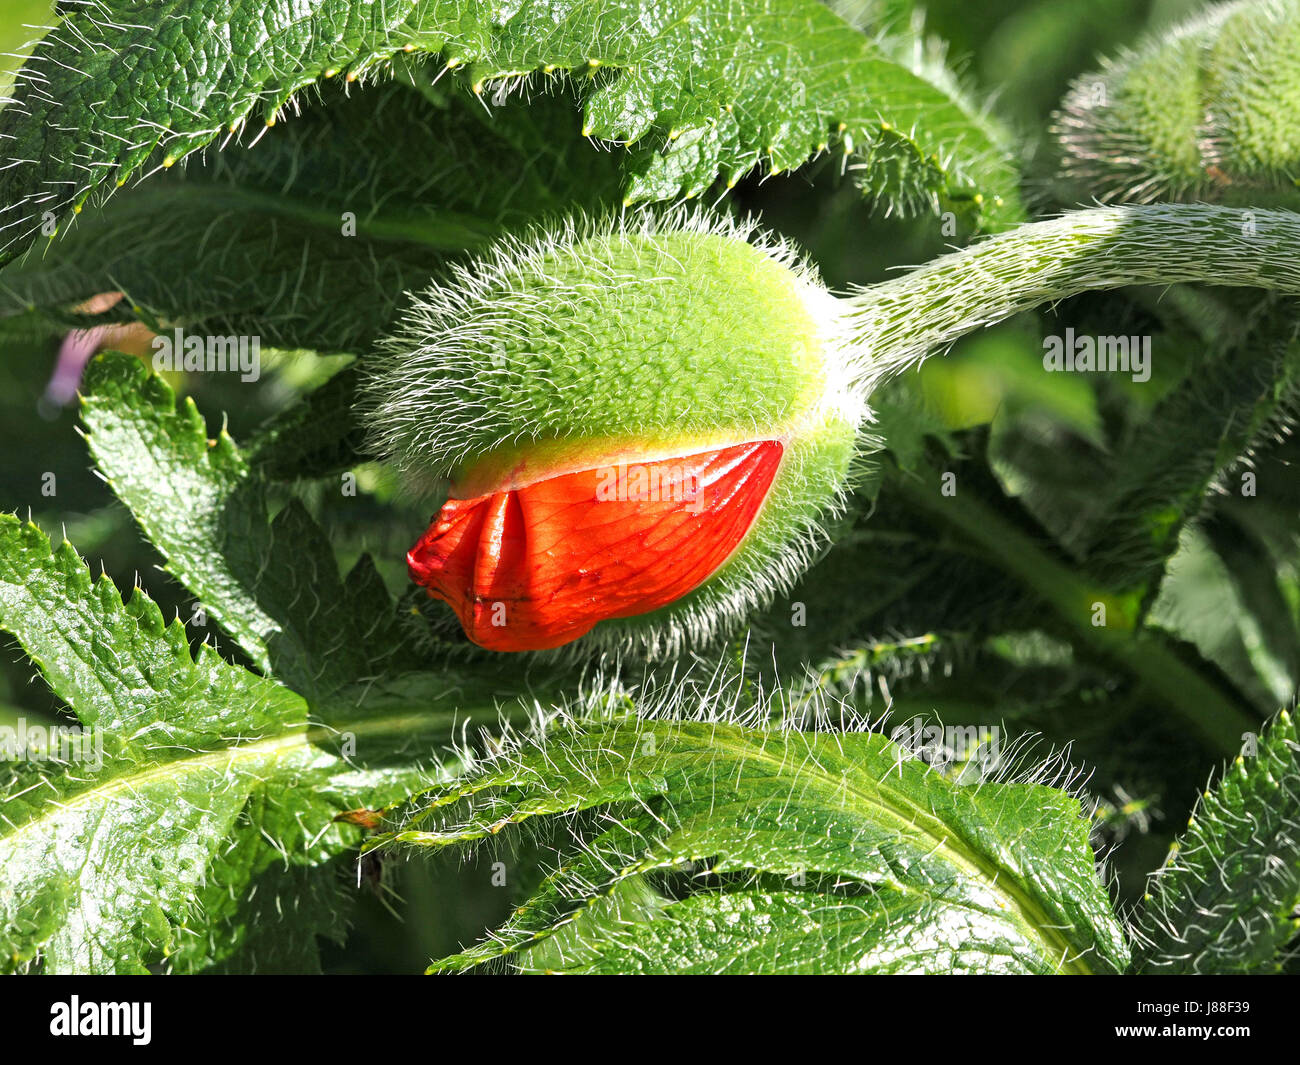 bright red flower of Papaver orientale (Oriental poppy) emerging from contrasting green spiky bud surrounded by spikey leaves, Gloucestershire,England Stock Photo